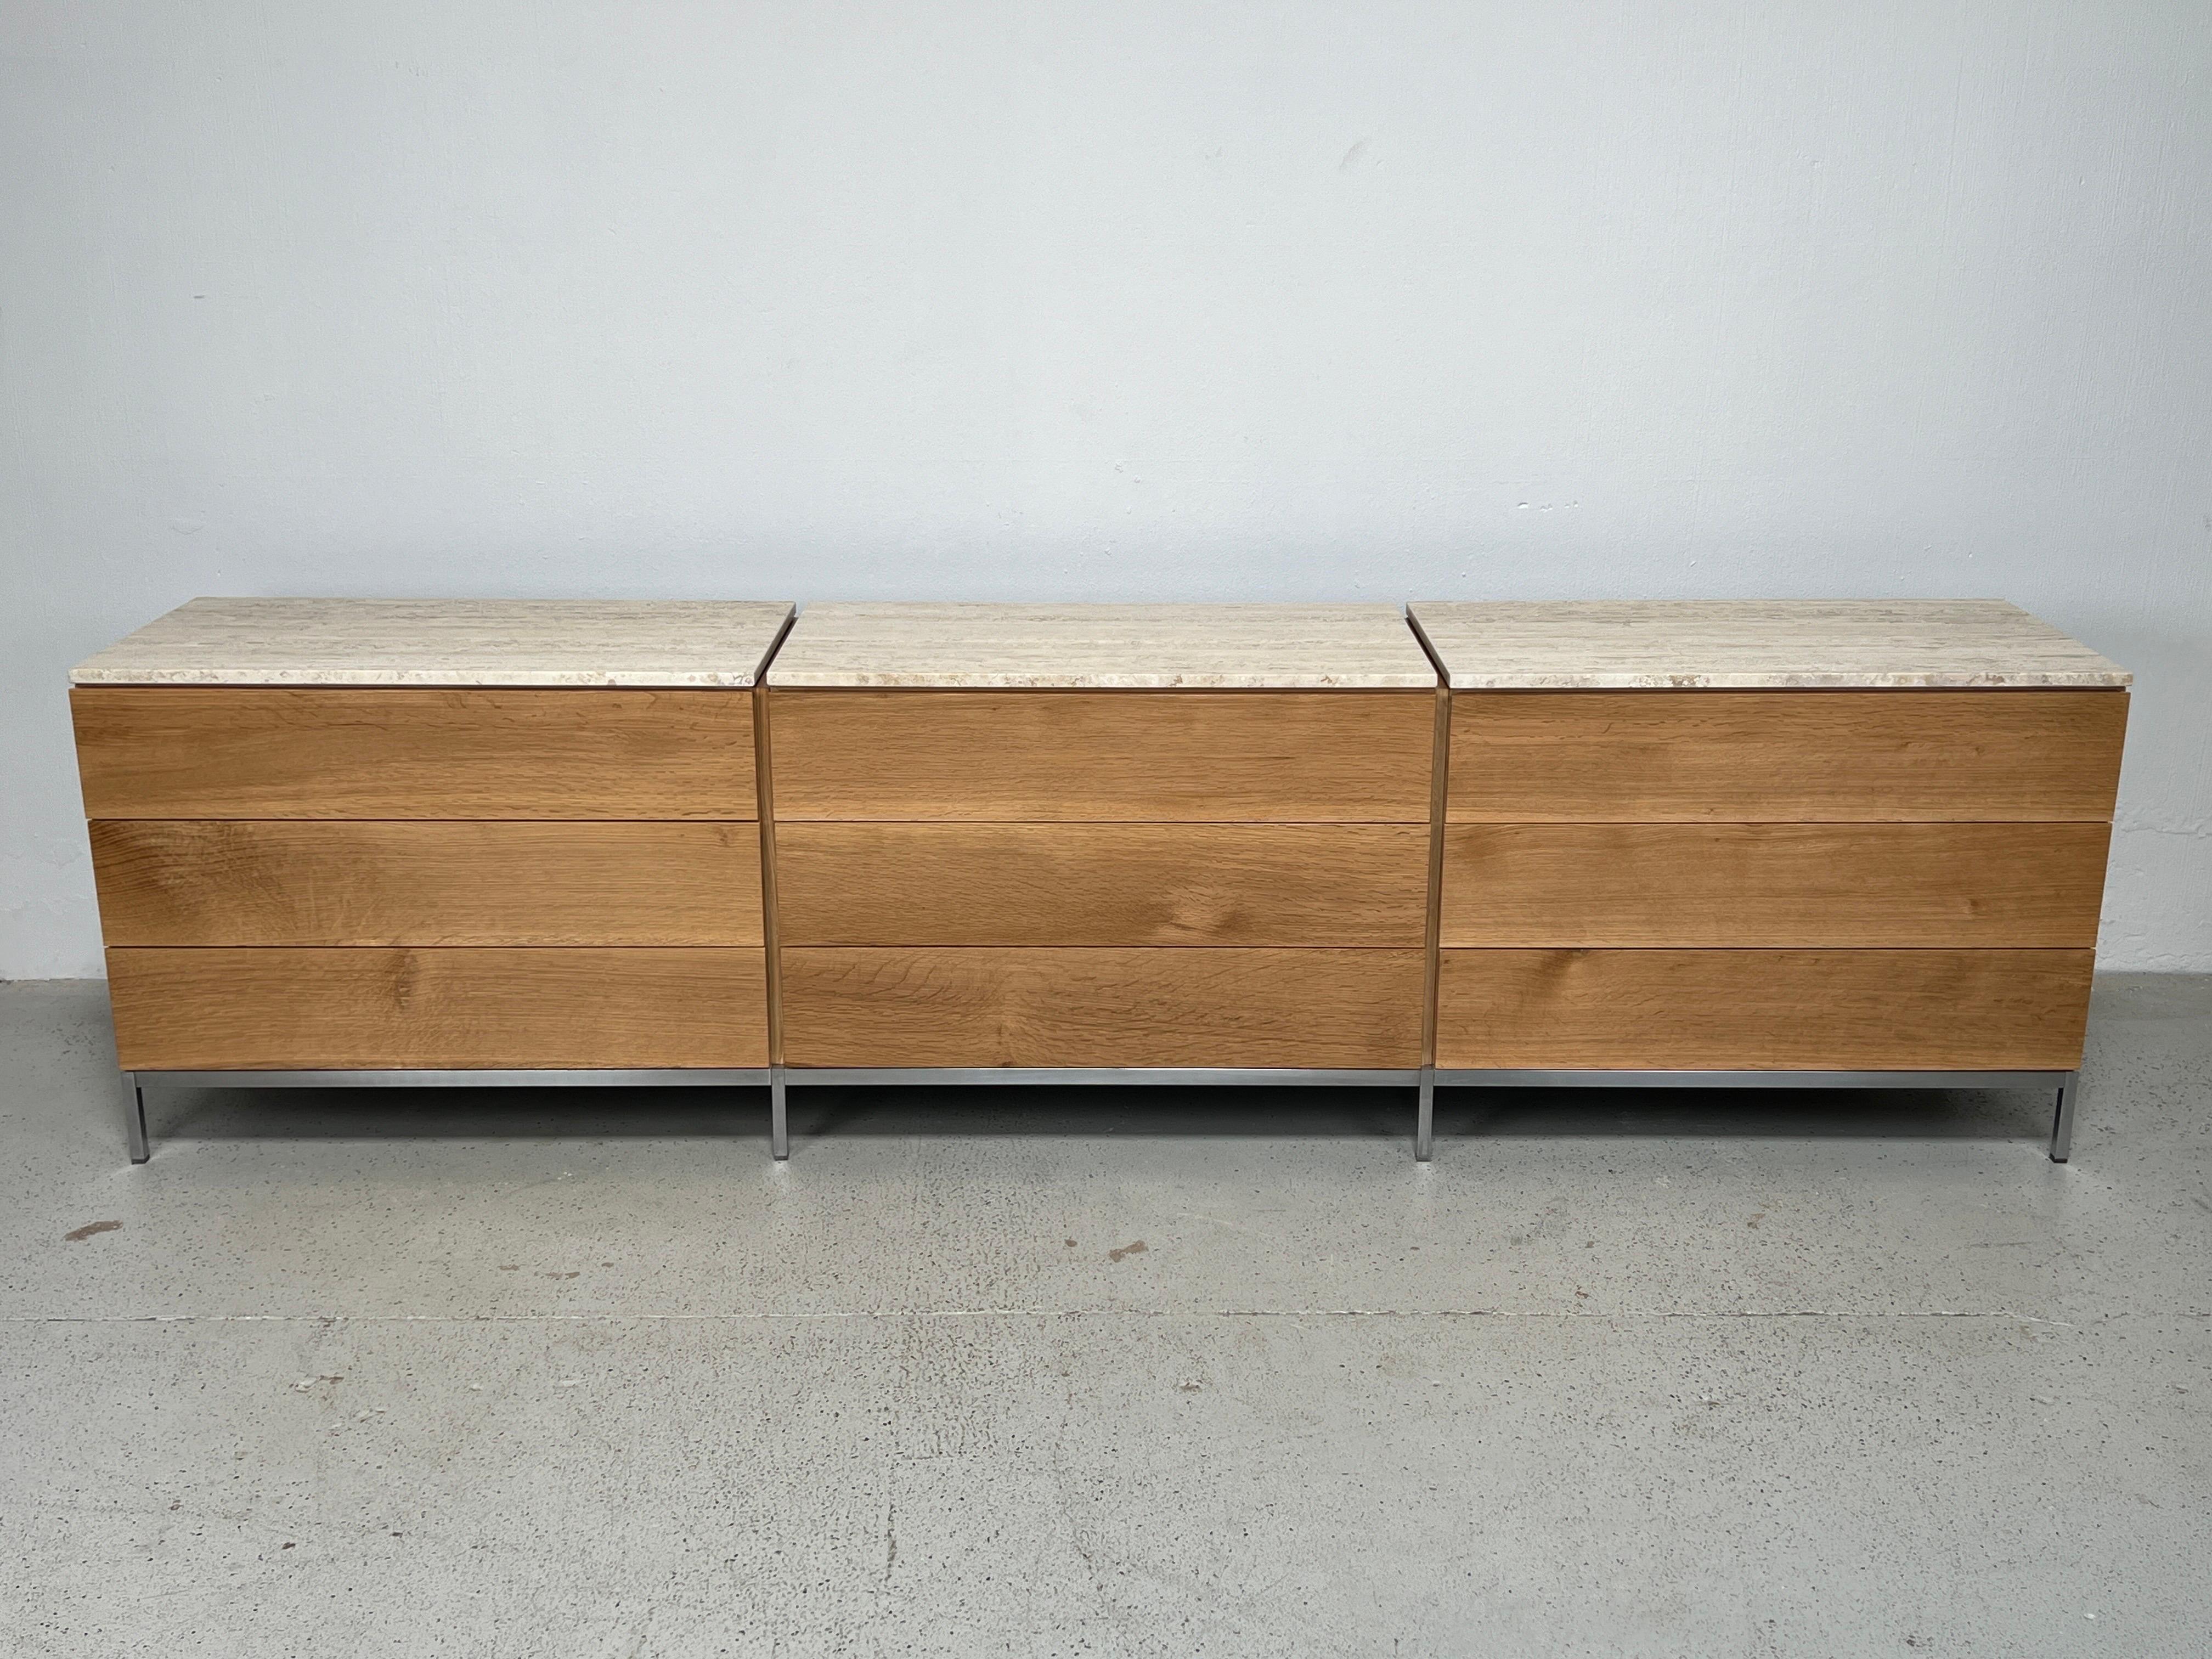 A triple dresser on brushed stainless base in oak with travertine tops. Designed by Florence Knoll for Knoll. 